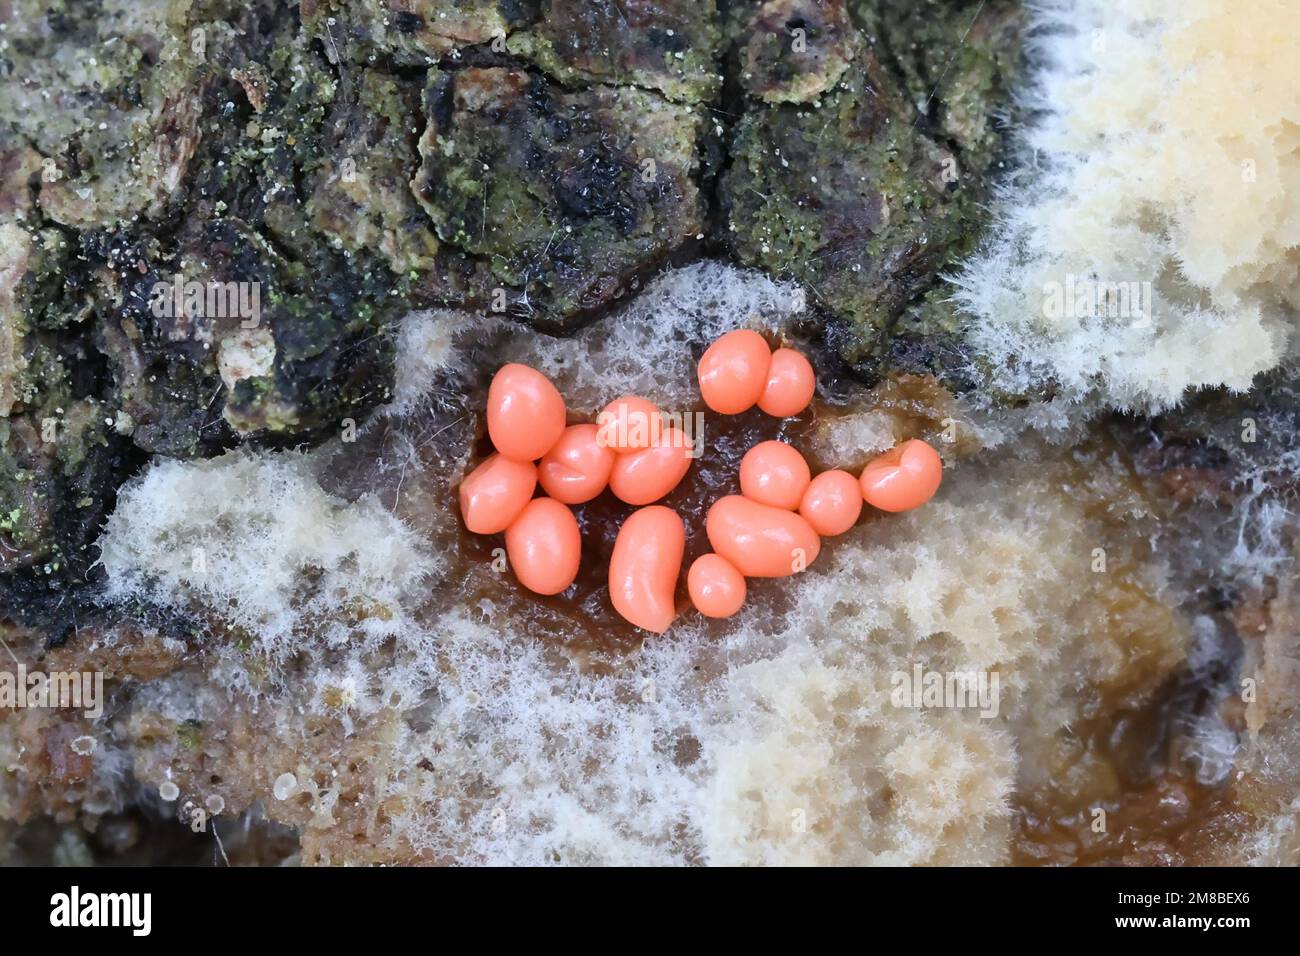 Trichia contorta, slime mold from Finland, no common English name Stock Photo